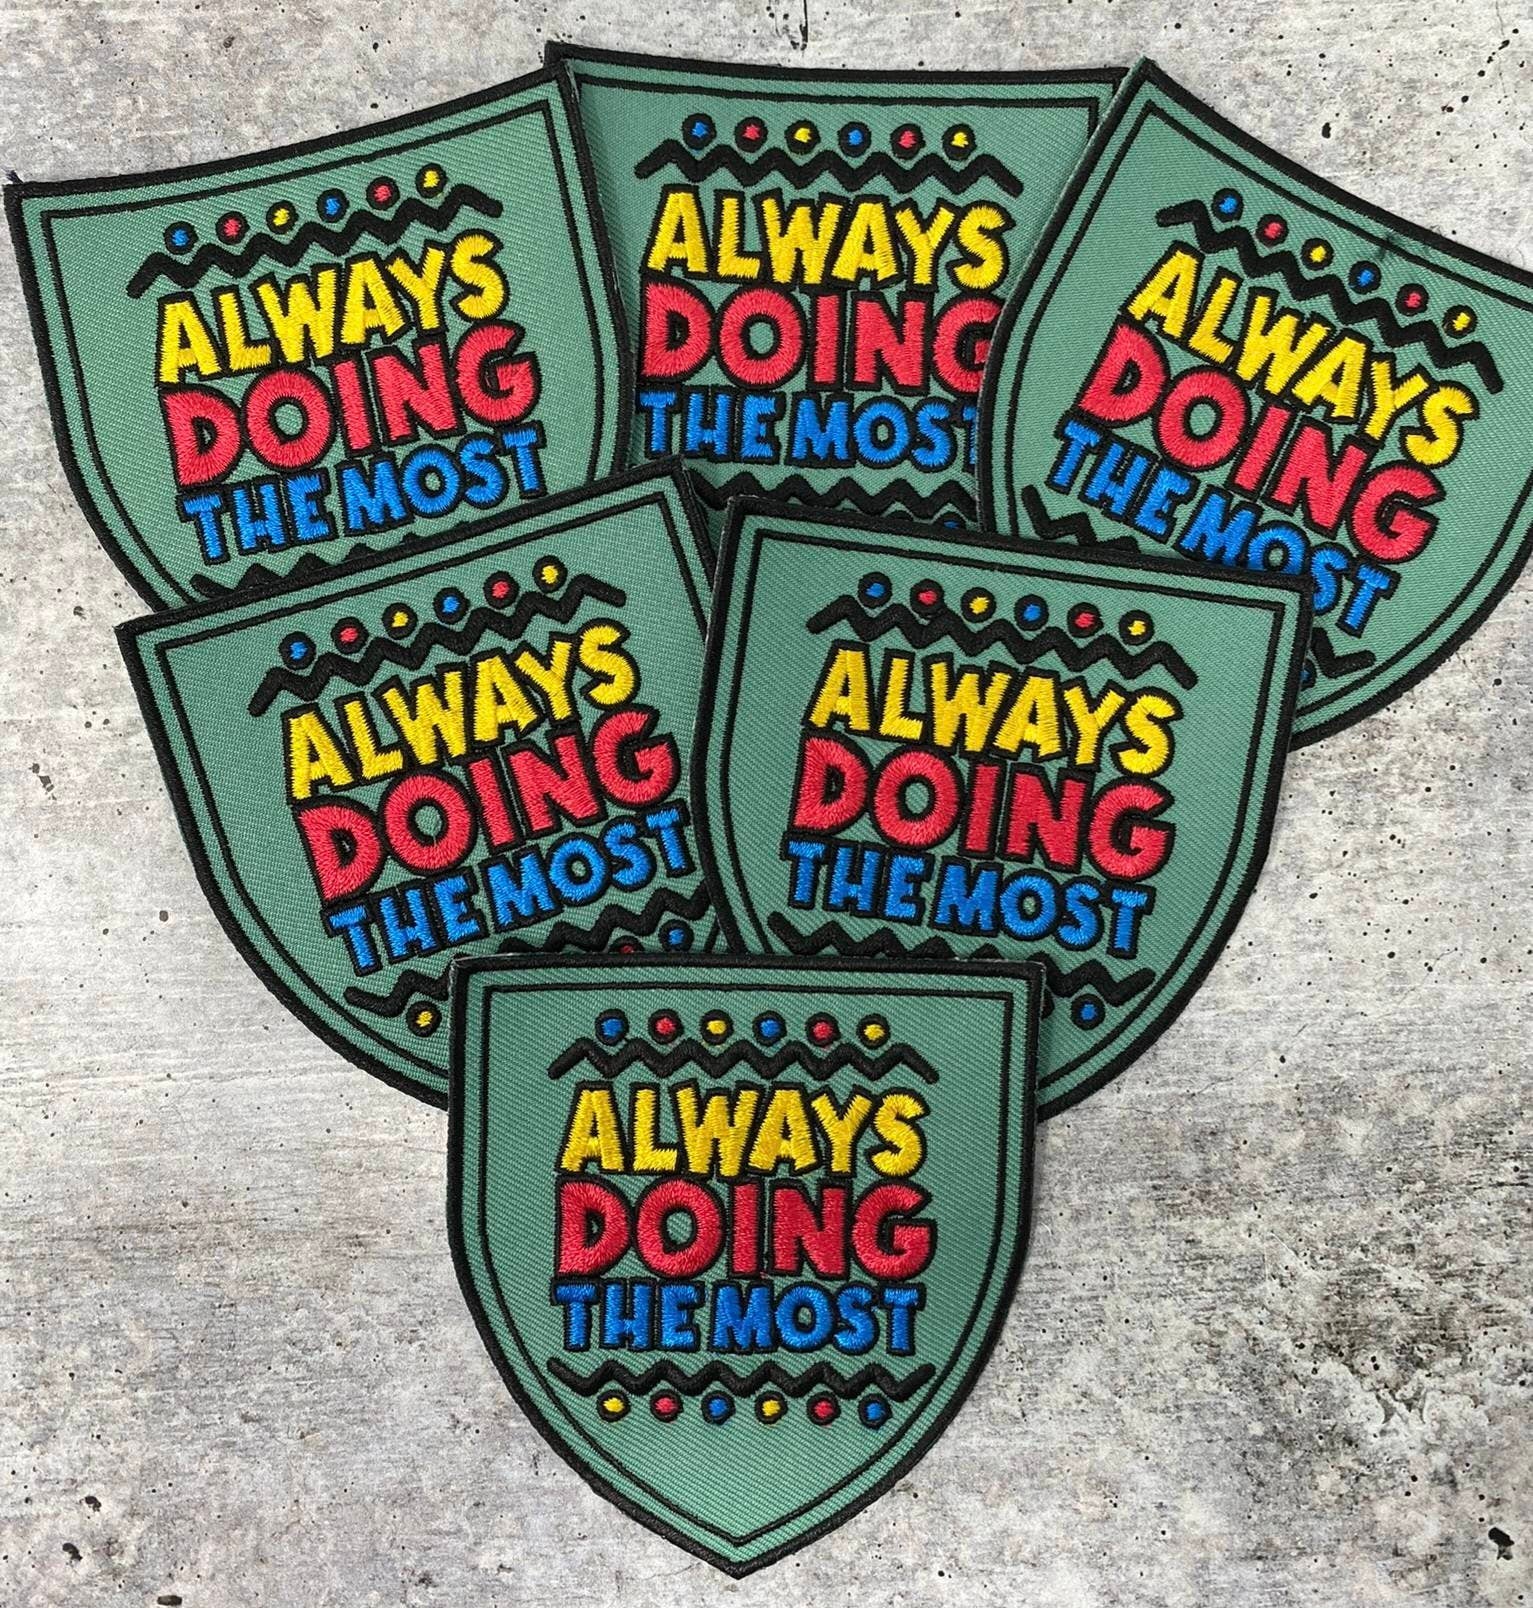 Cute Statement Patch, 1-pc "Always Doing the Most" Size 4", DIY Applique, Iron-On Embroidered Patch, Hotfix Patch for Hats, Crocs, Clothing